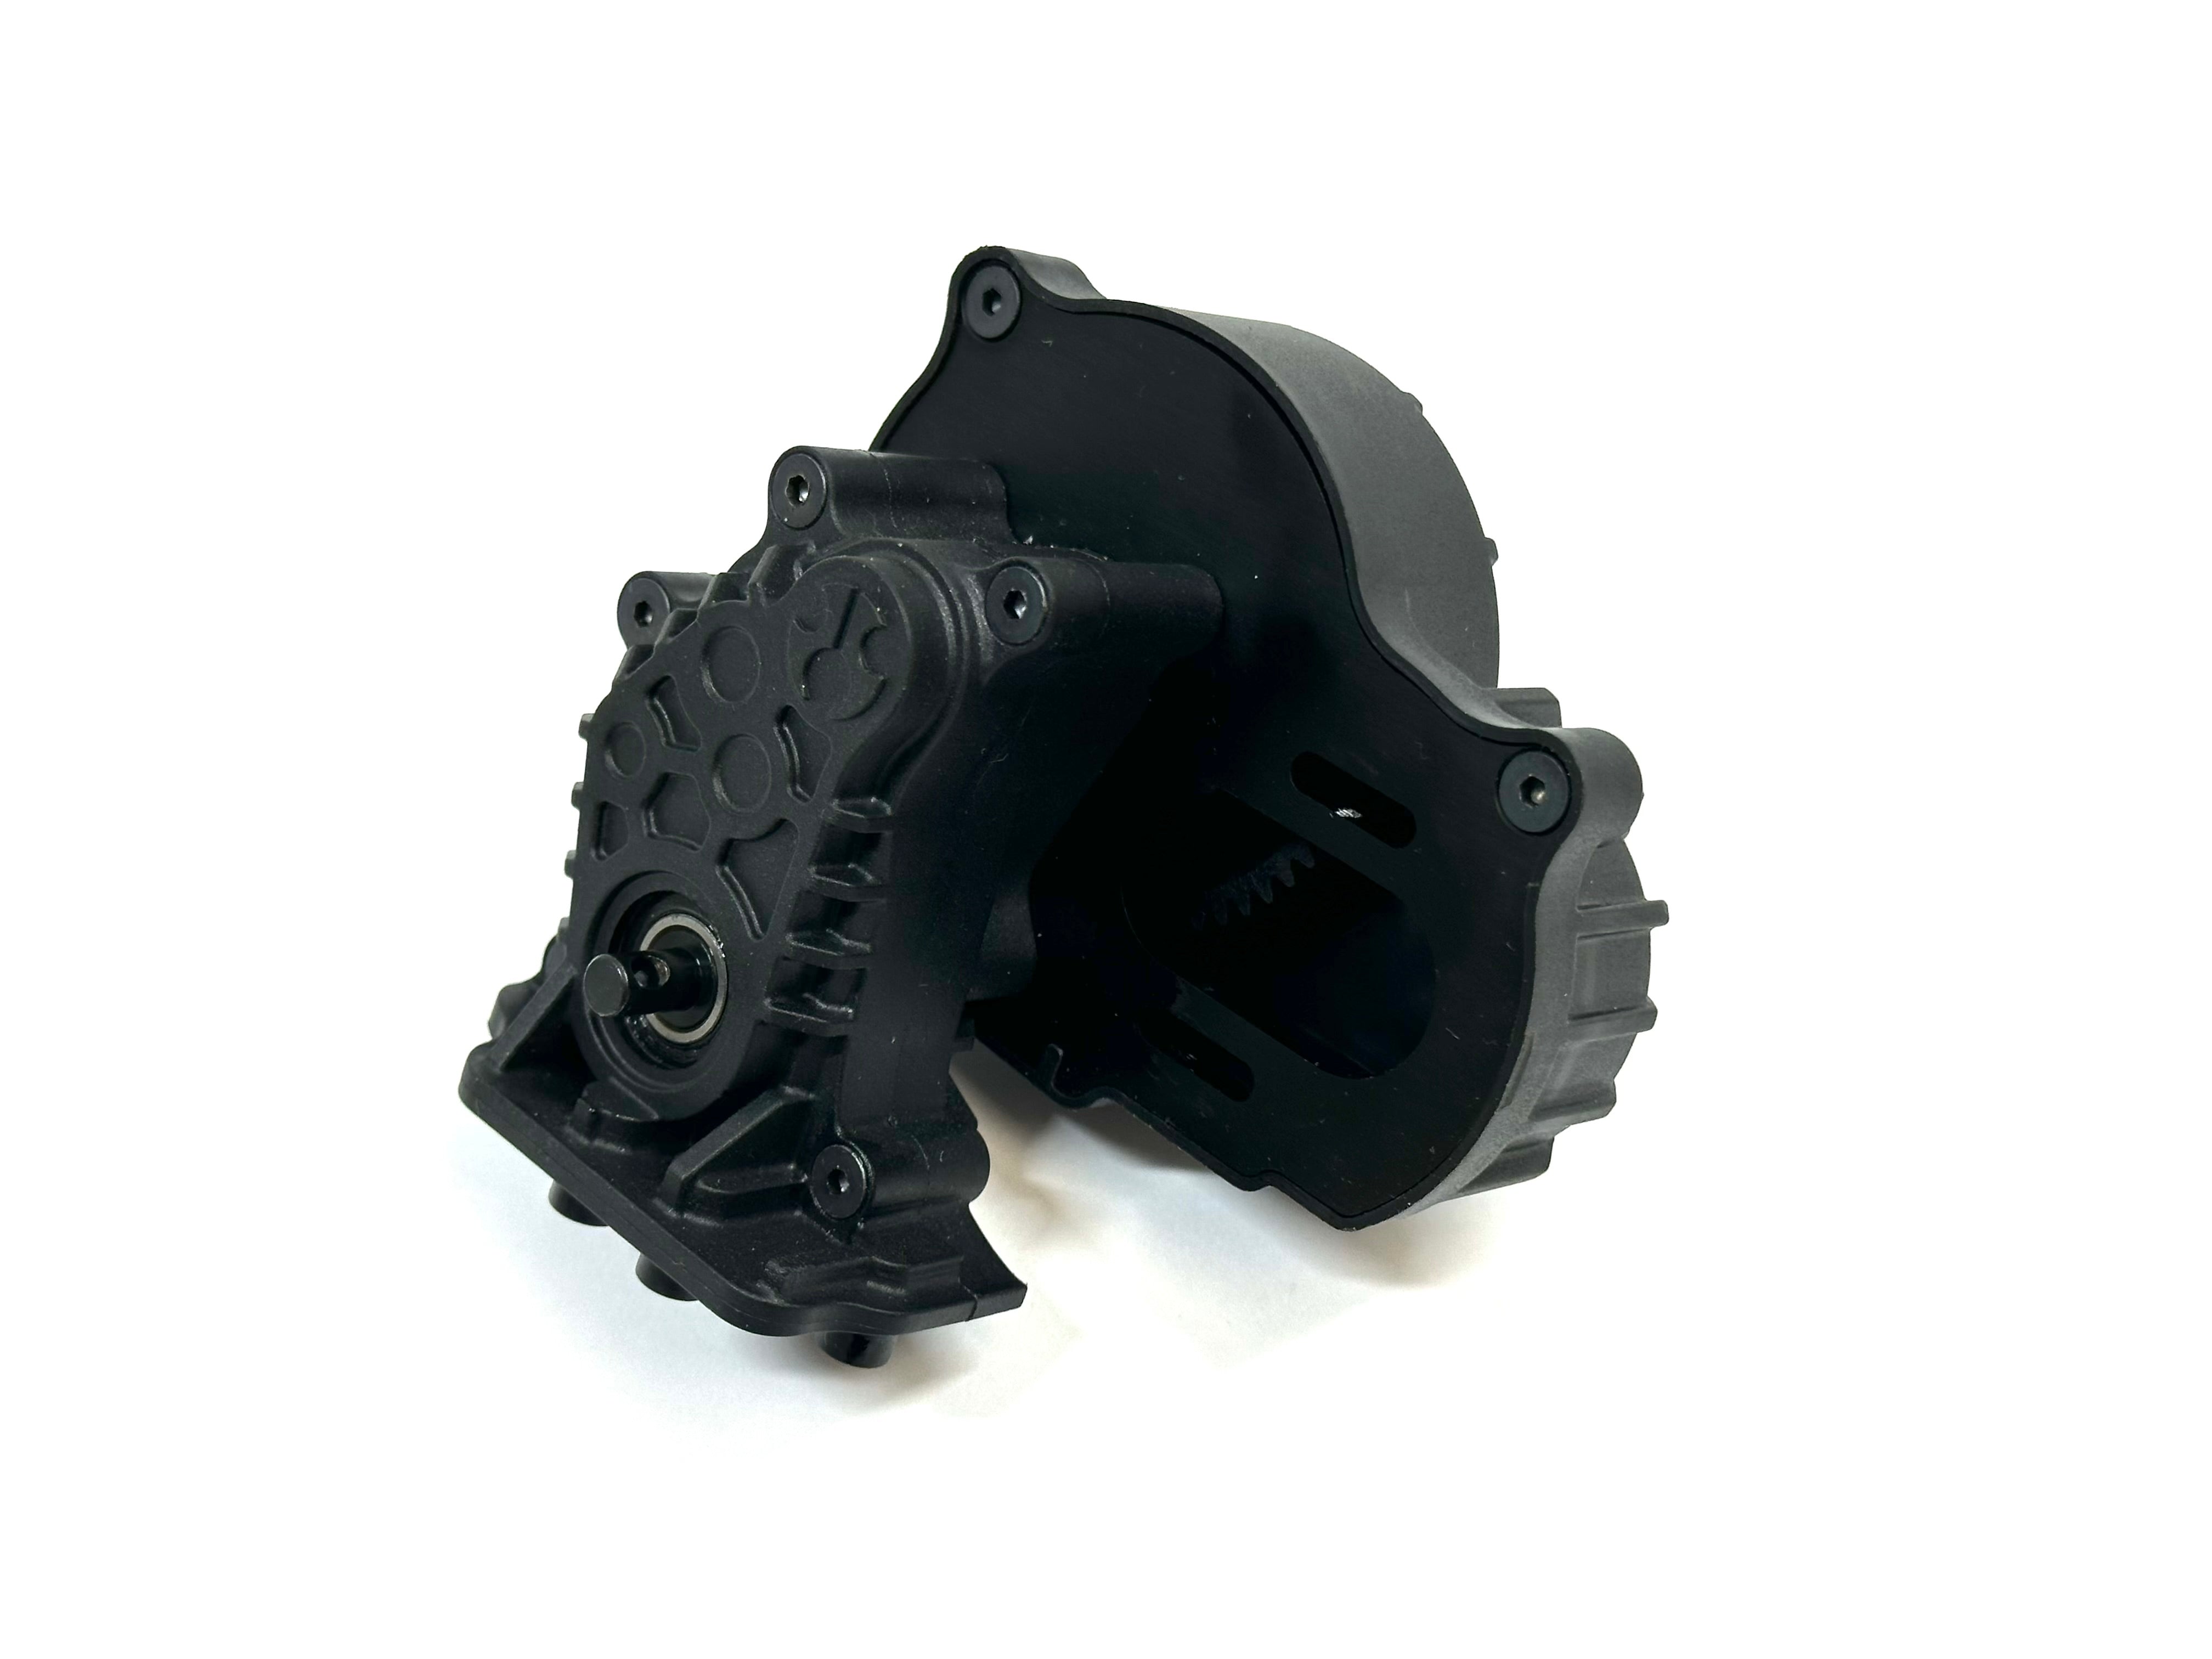 Axial SCX10iii Basecamp Stock Transmission